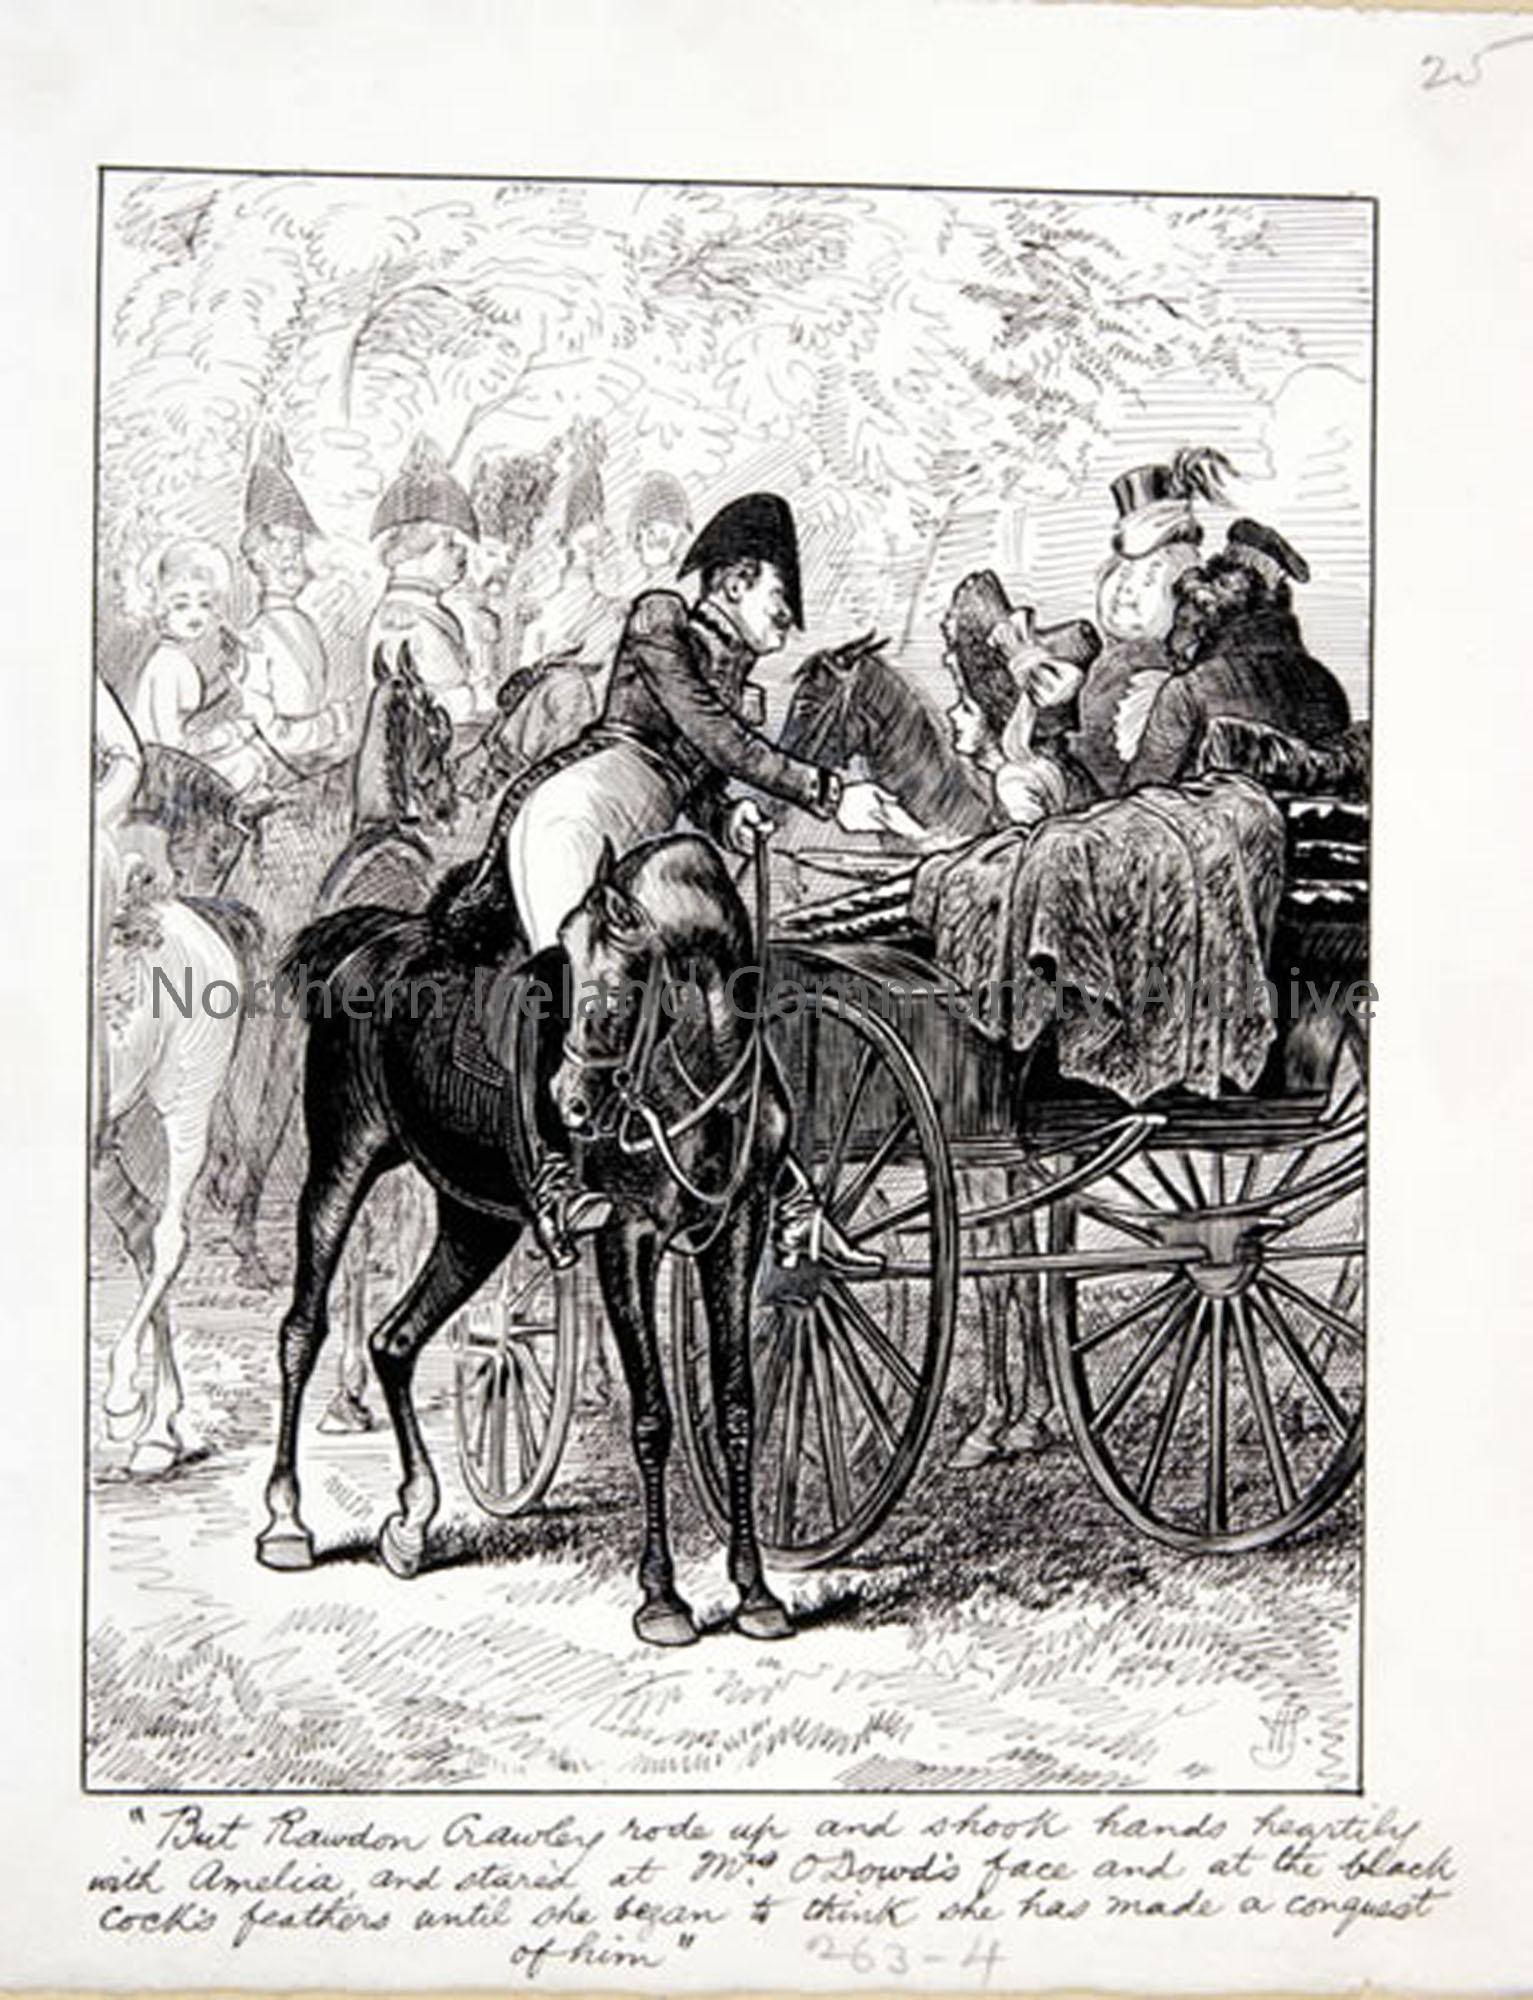 Pen and ink drawing by Hugh Thomson for Vanity Fair by William Makepeace Thackeray  (6851)